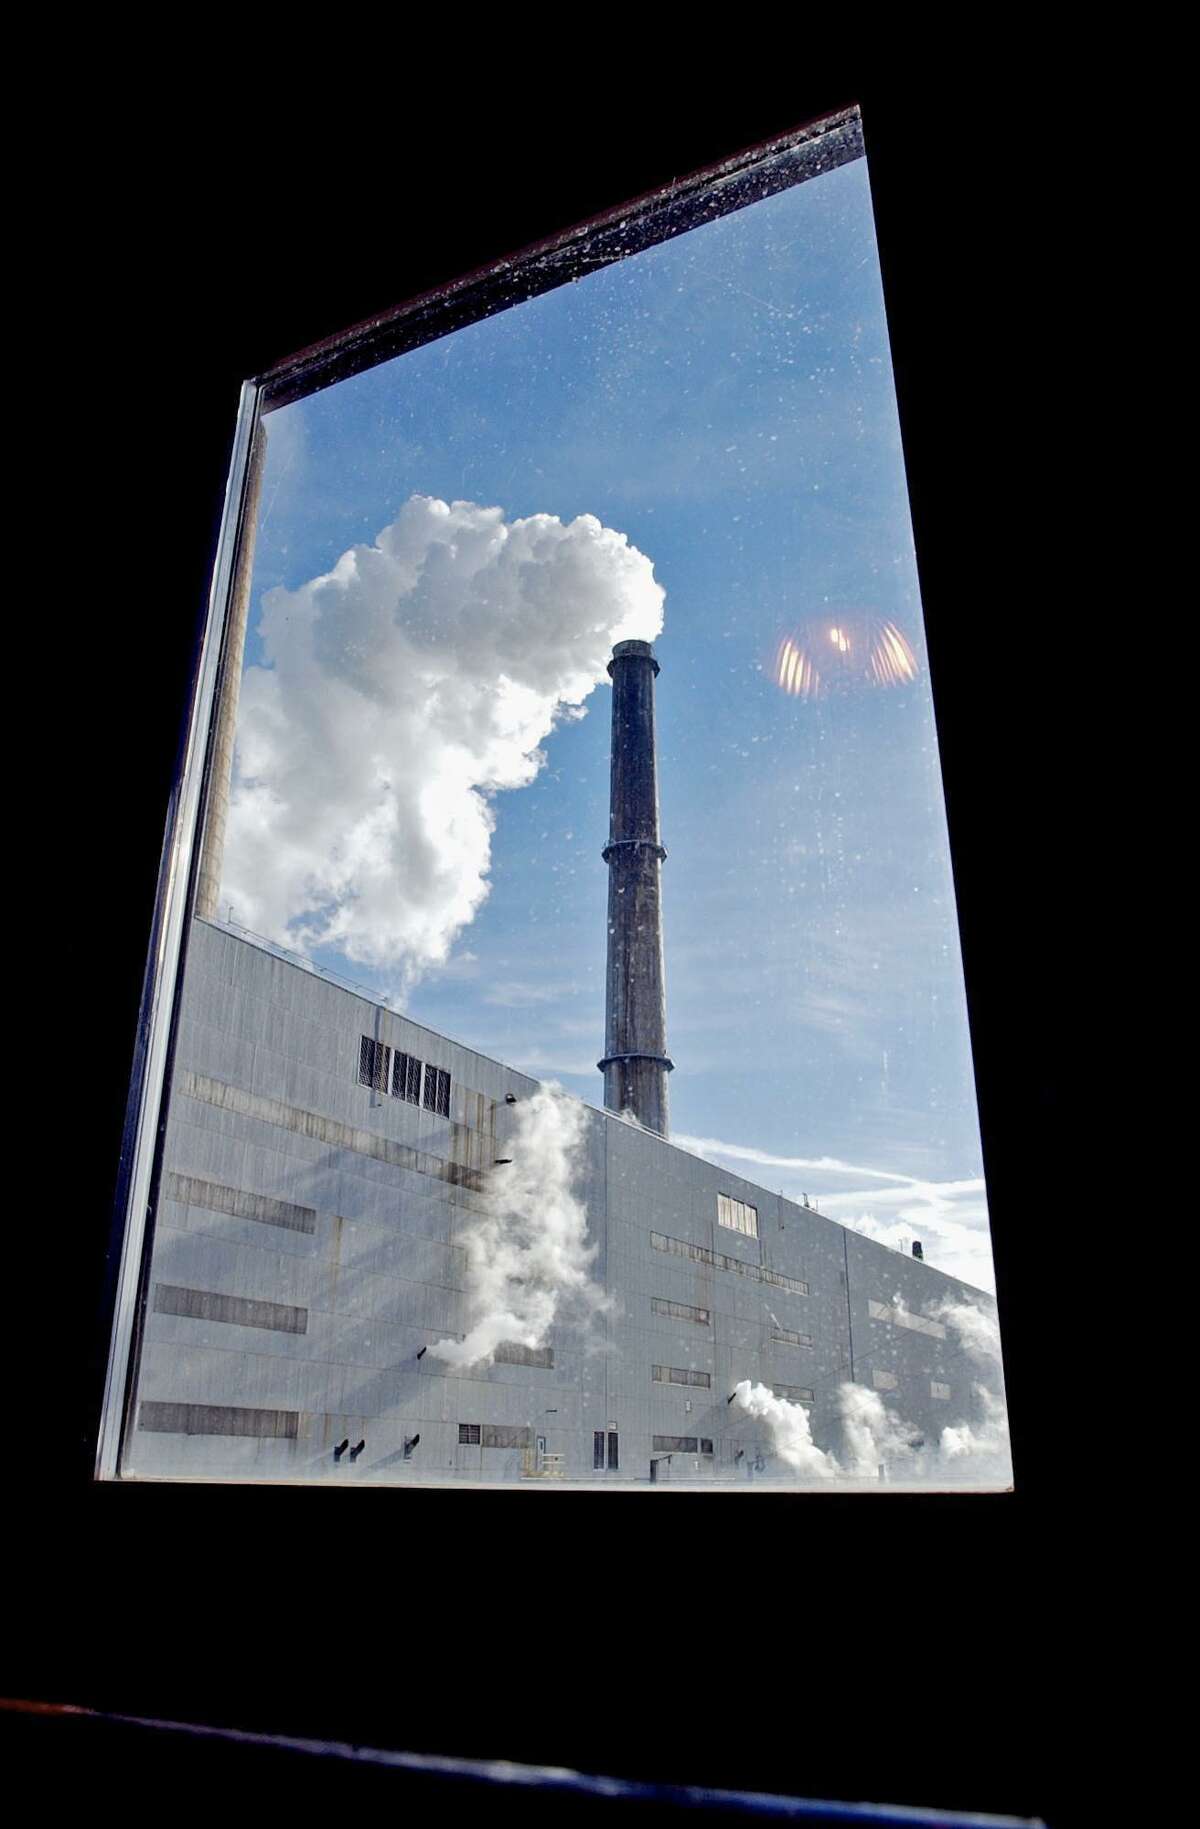 **FILE**The Oak Creek power plant is seen through a window Tuesday, Jan. 13, 2003, in Oak Creek, Wis. in a file photo. The Wisconsin Supreme Court is weighing the future of the $2.15 billion proposed plant in this Milwaukee suburb 80 miles north of Chicago. Its decision could set the standard for whether regulators require energy companies to produce more expensive, low emissions electricity or older, polluting pulverized coal power, according to Bruce Nilles, the Sierra Club's senior Midwest representative. (AP Photo/Journal Times, Gregory Shaver, File) HOUCHRON CAPTION (06/26/2005) SECBIZ COLOR: EXPANSION DESIRED: A smokestack belches at the Oak Creek Power plant in Wisconsin. A $2.15 billion plan to expand the plant outside Milwaukee has angered environmentalists.